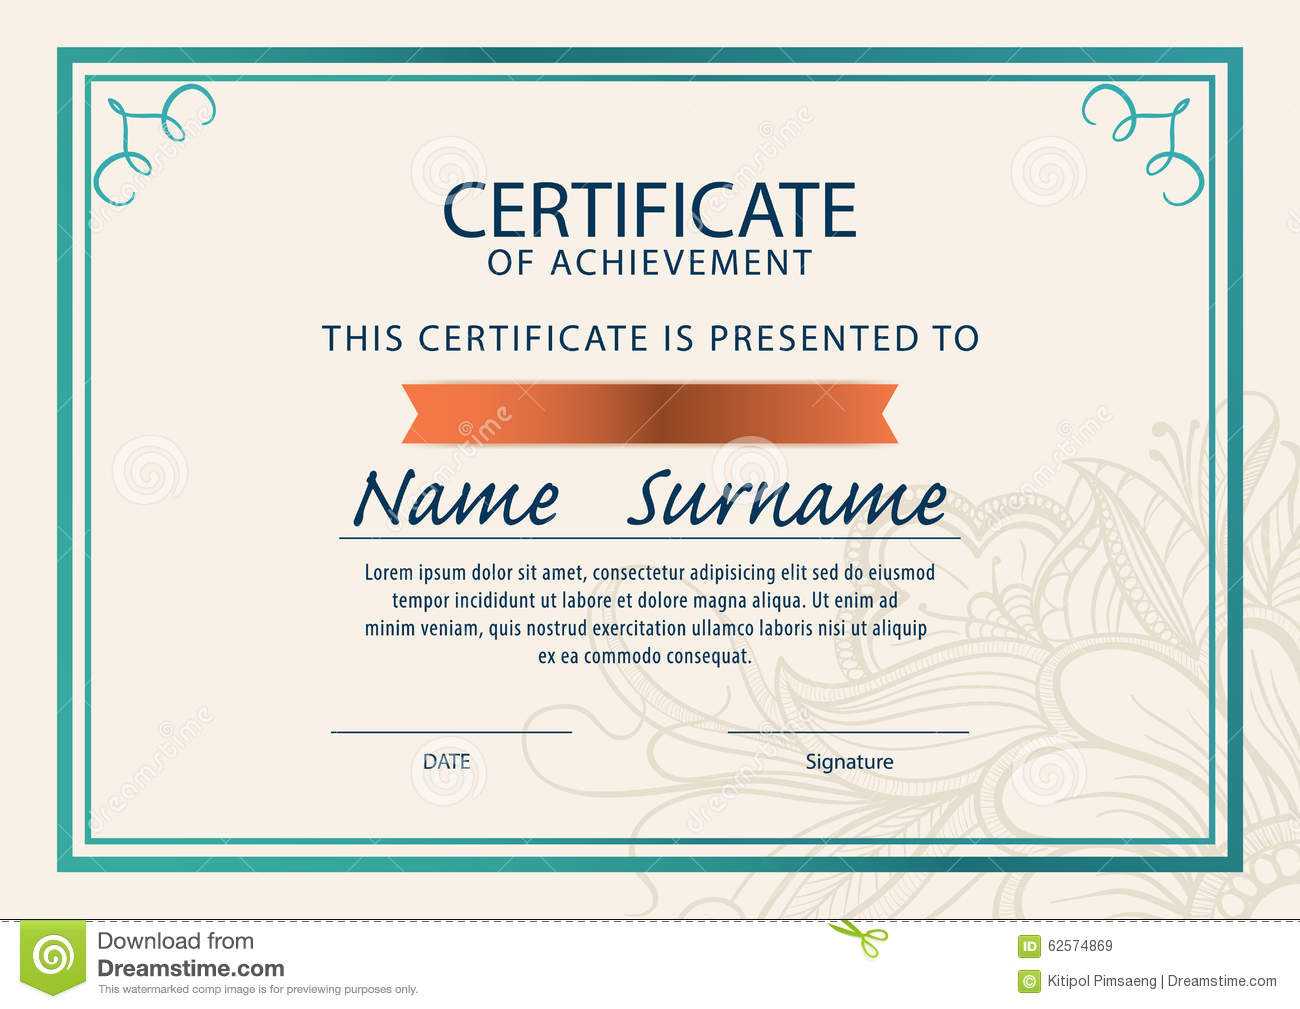 Certificate Template,diploma,a4 Size , Illustration 62574869 With Regard To Certificate Template Size